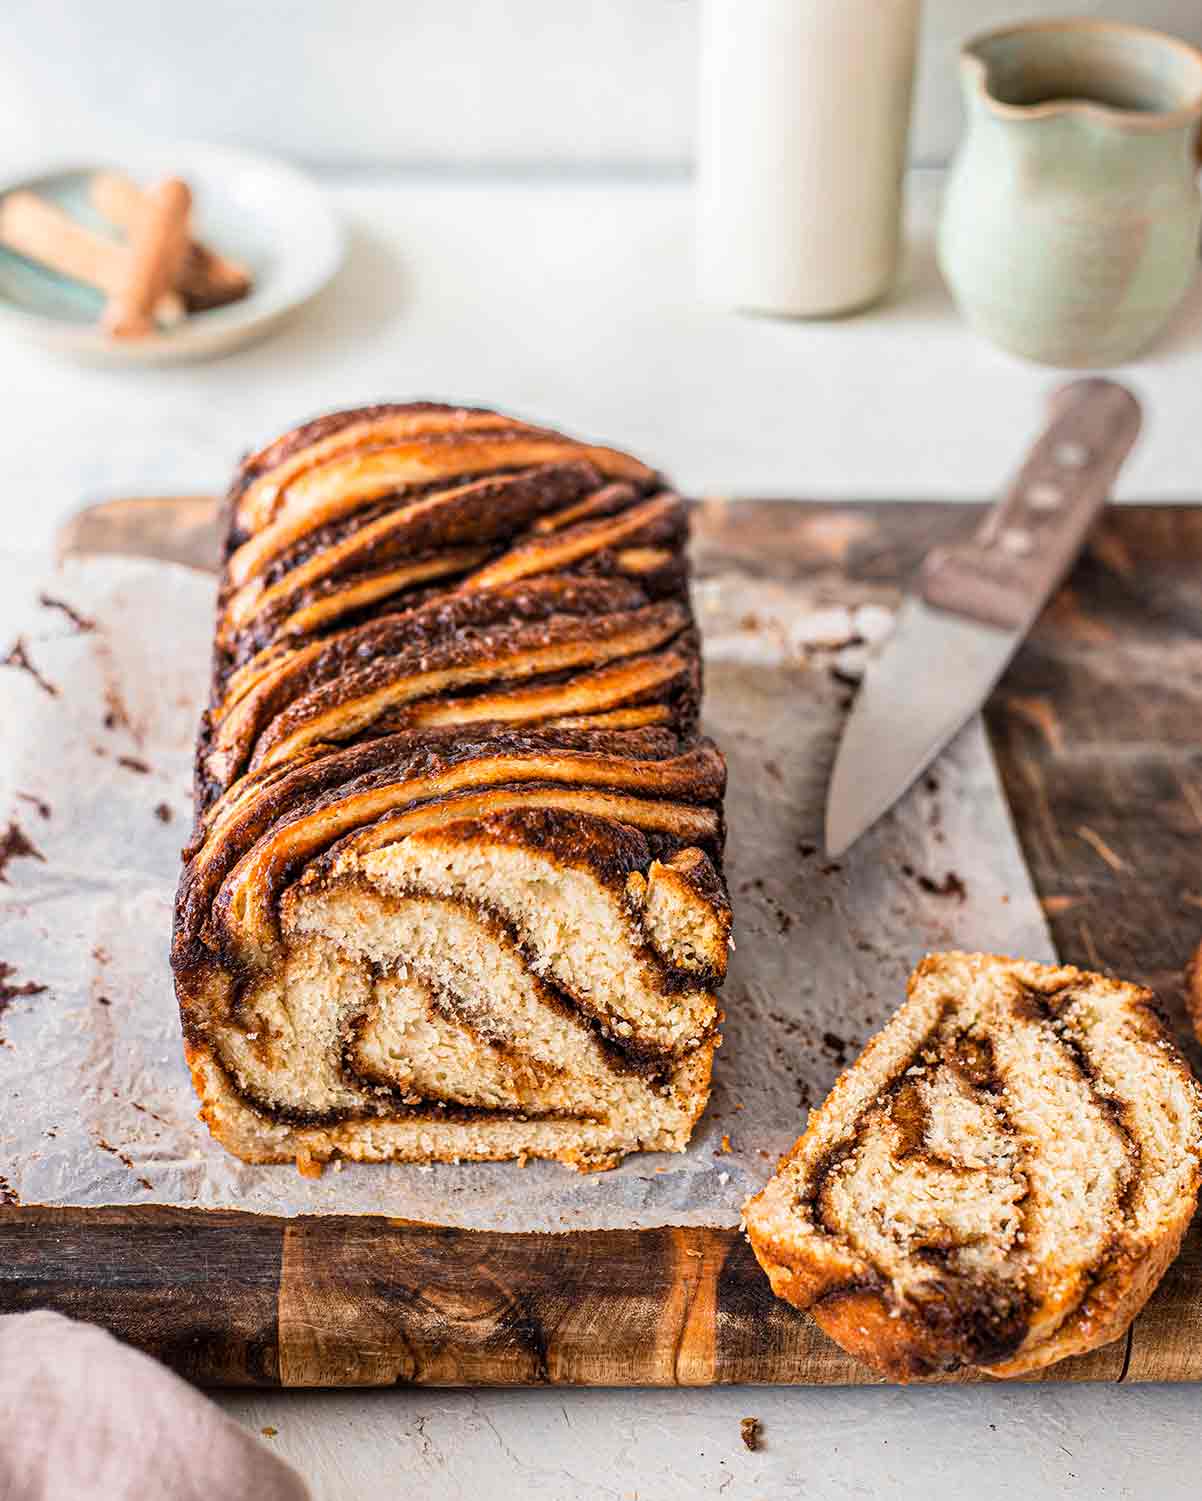 Vegan Cinnamon Babka with slice cut off showing interior. Babka is on a rustic piece of baking paper and a chopping board with a knife.